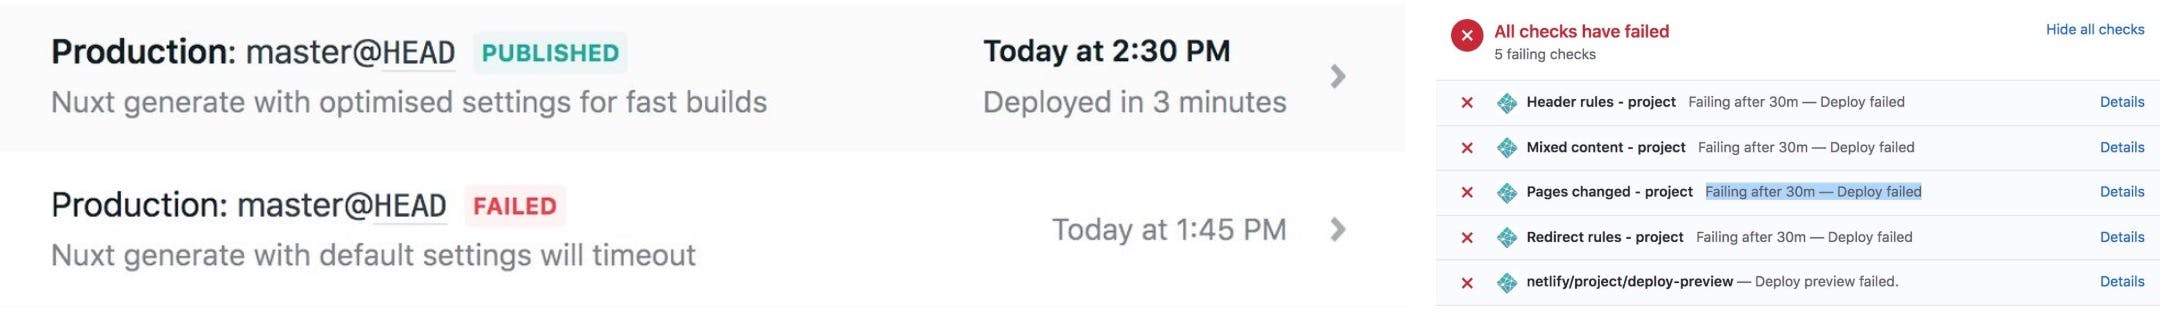 Netlify deploy failing after 30 minutes